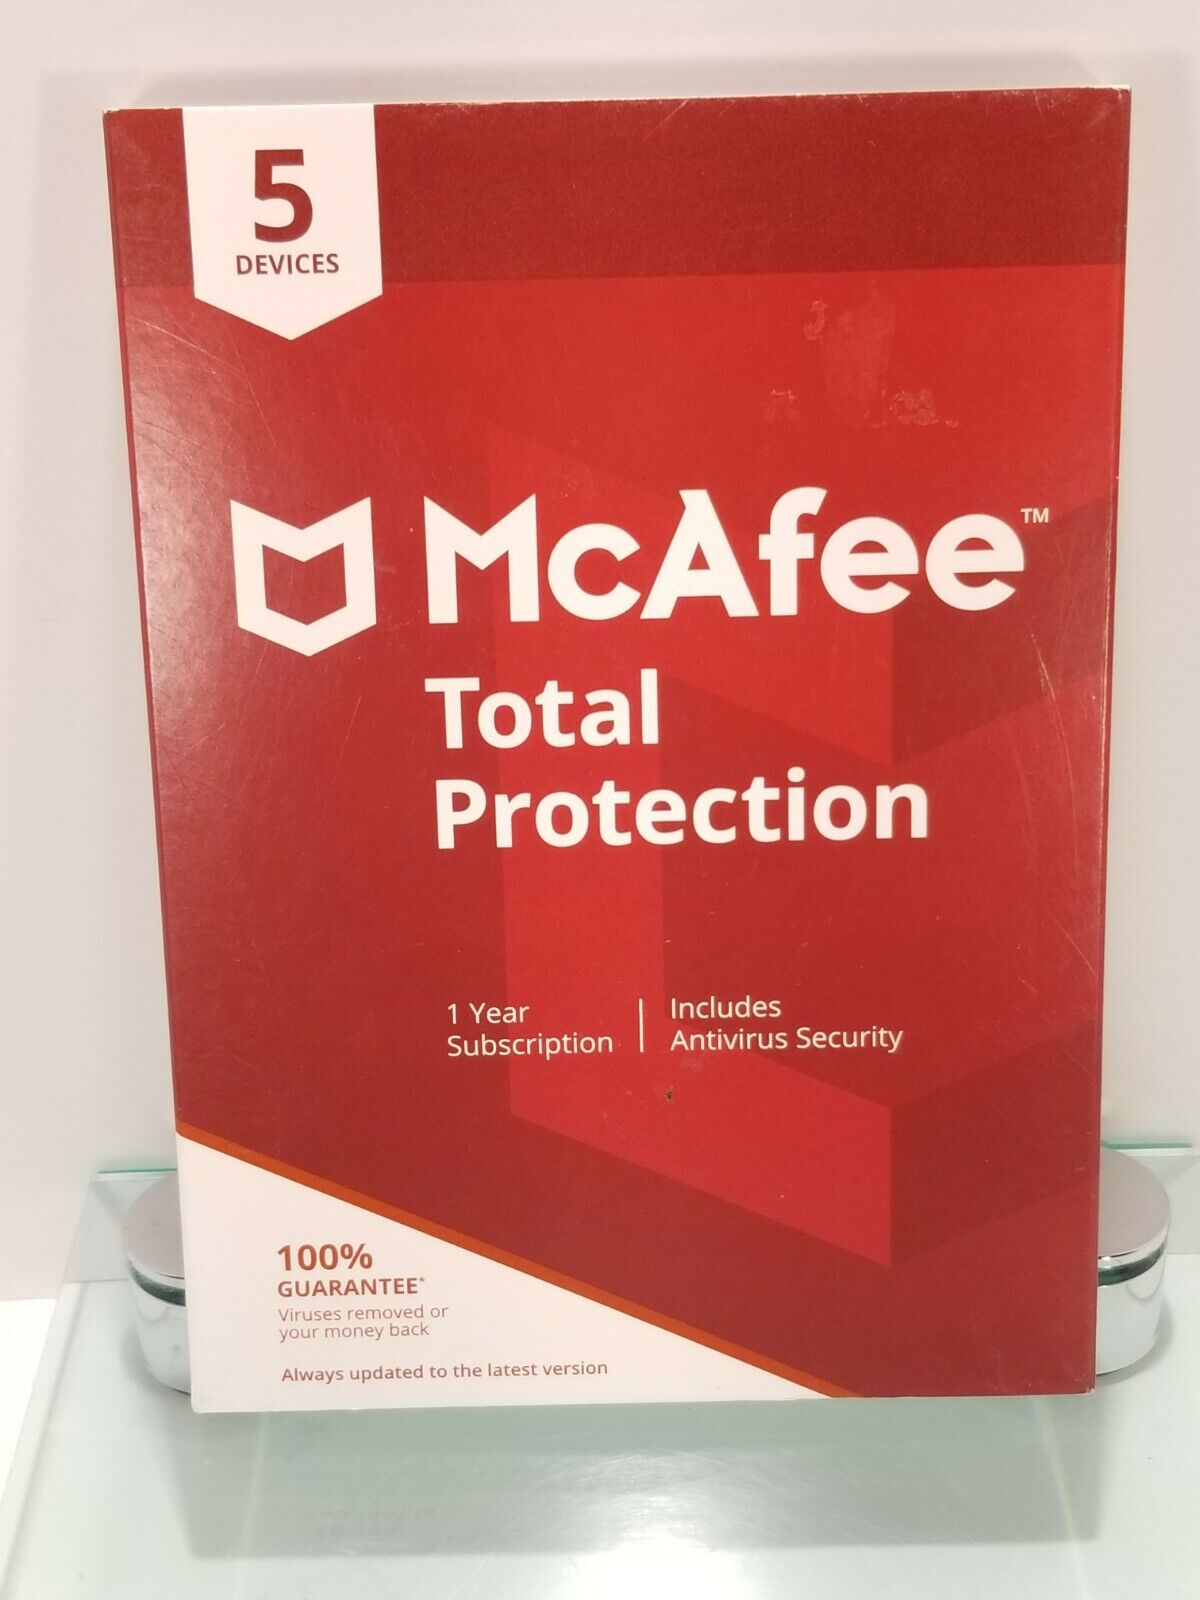 McAfee Total Protection 5 Device PC, MAC, iOS Anti-Virus 1yr Subscription